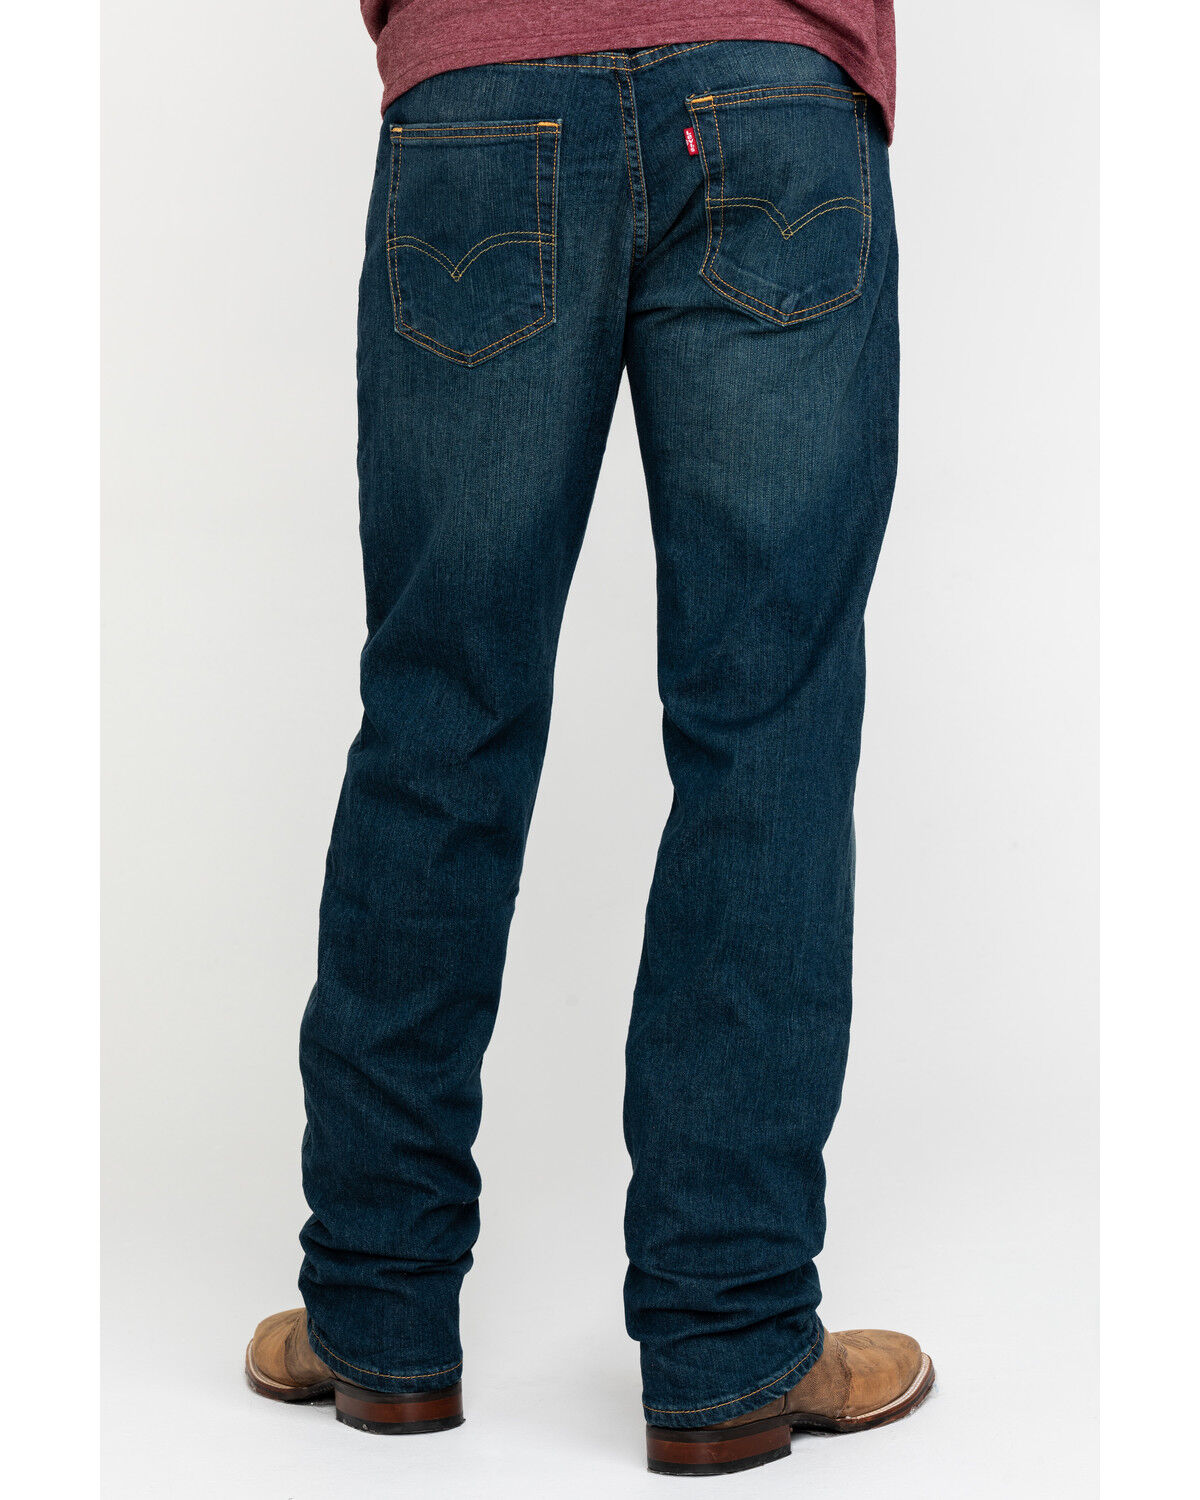 Cash Relaxed Straight Leg Jeans 